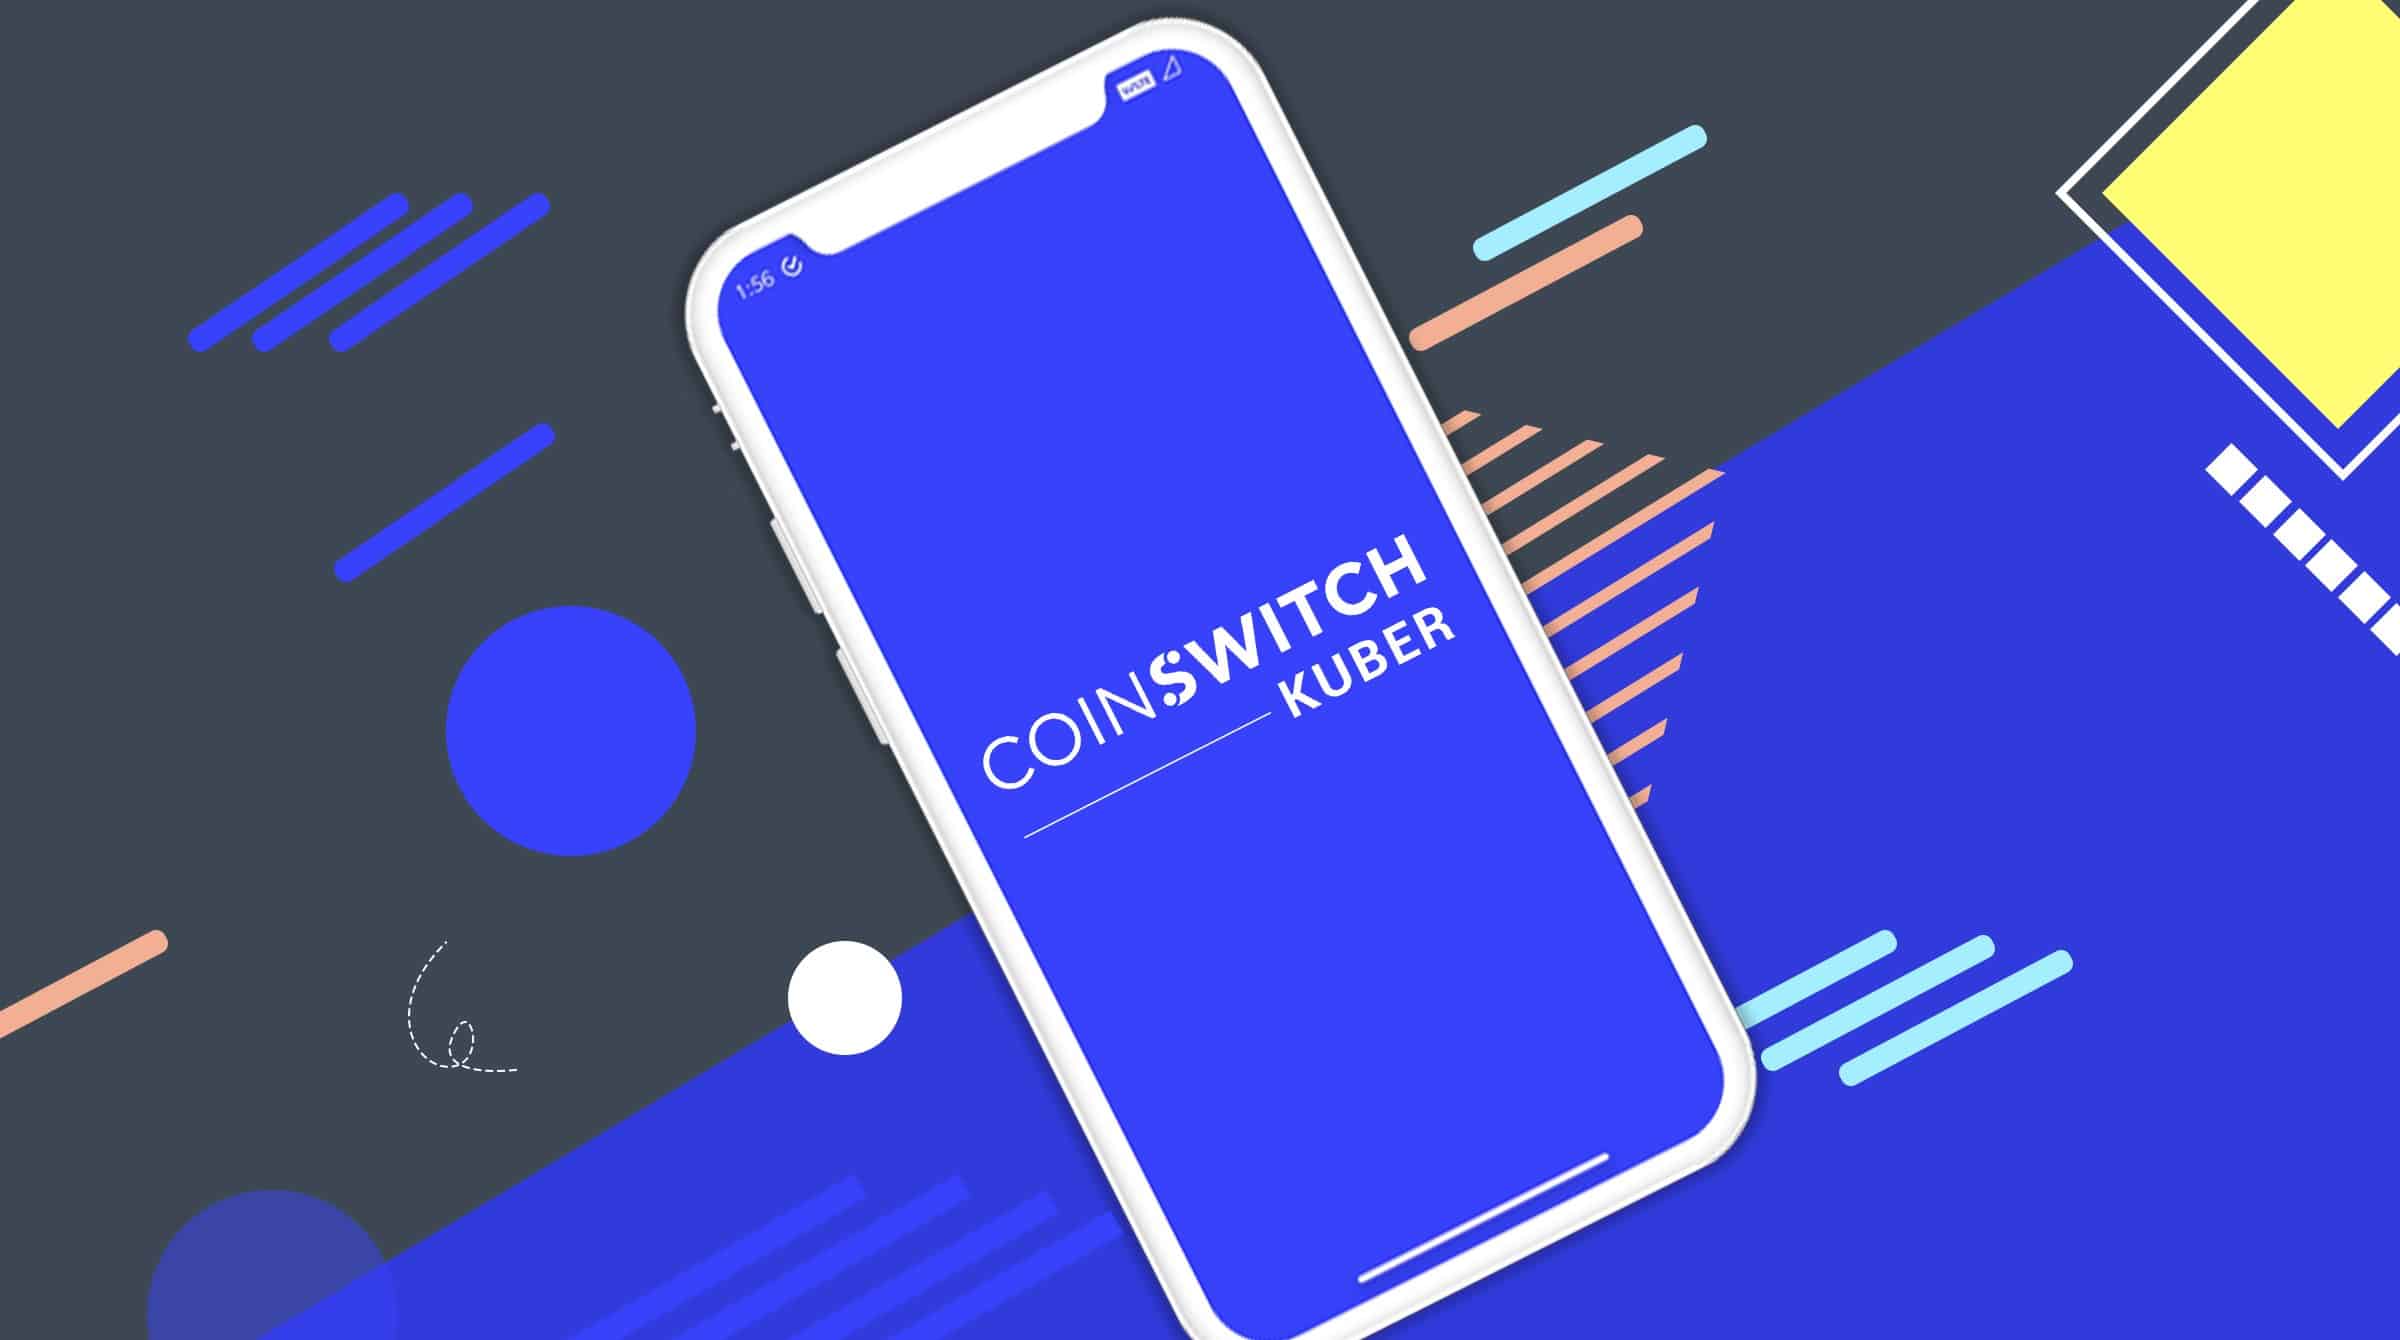 CoinSwitch Kuber launches ‘Smart Investing’ ad campaign for cryptocurrency investment awareness